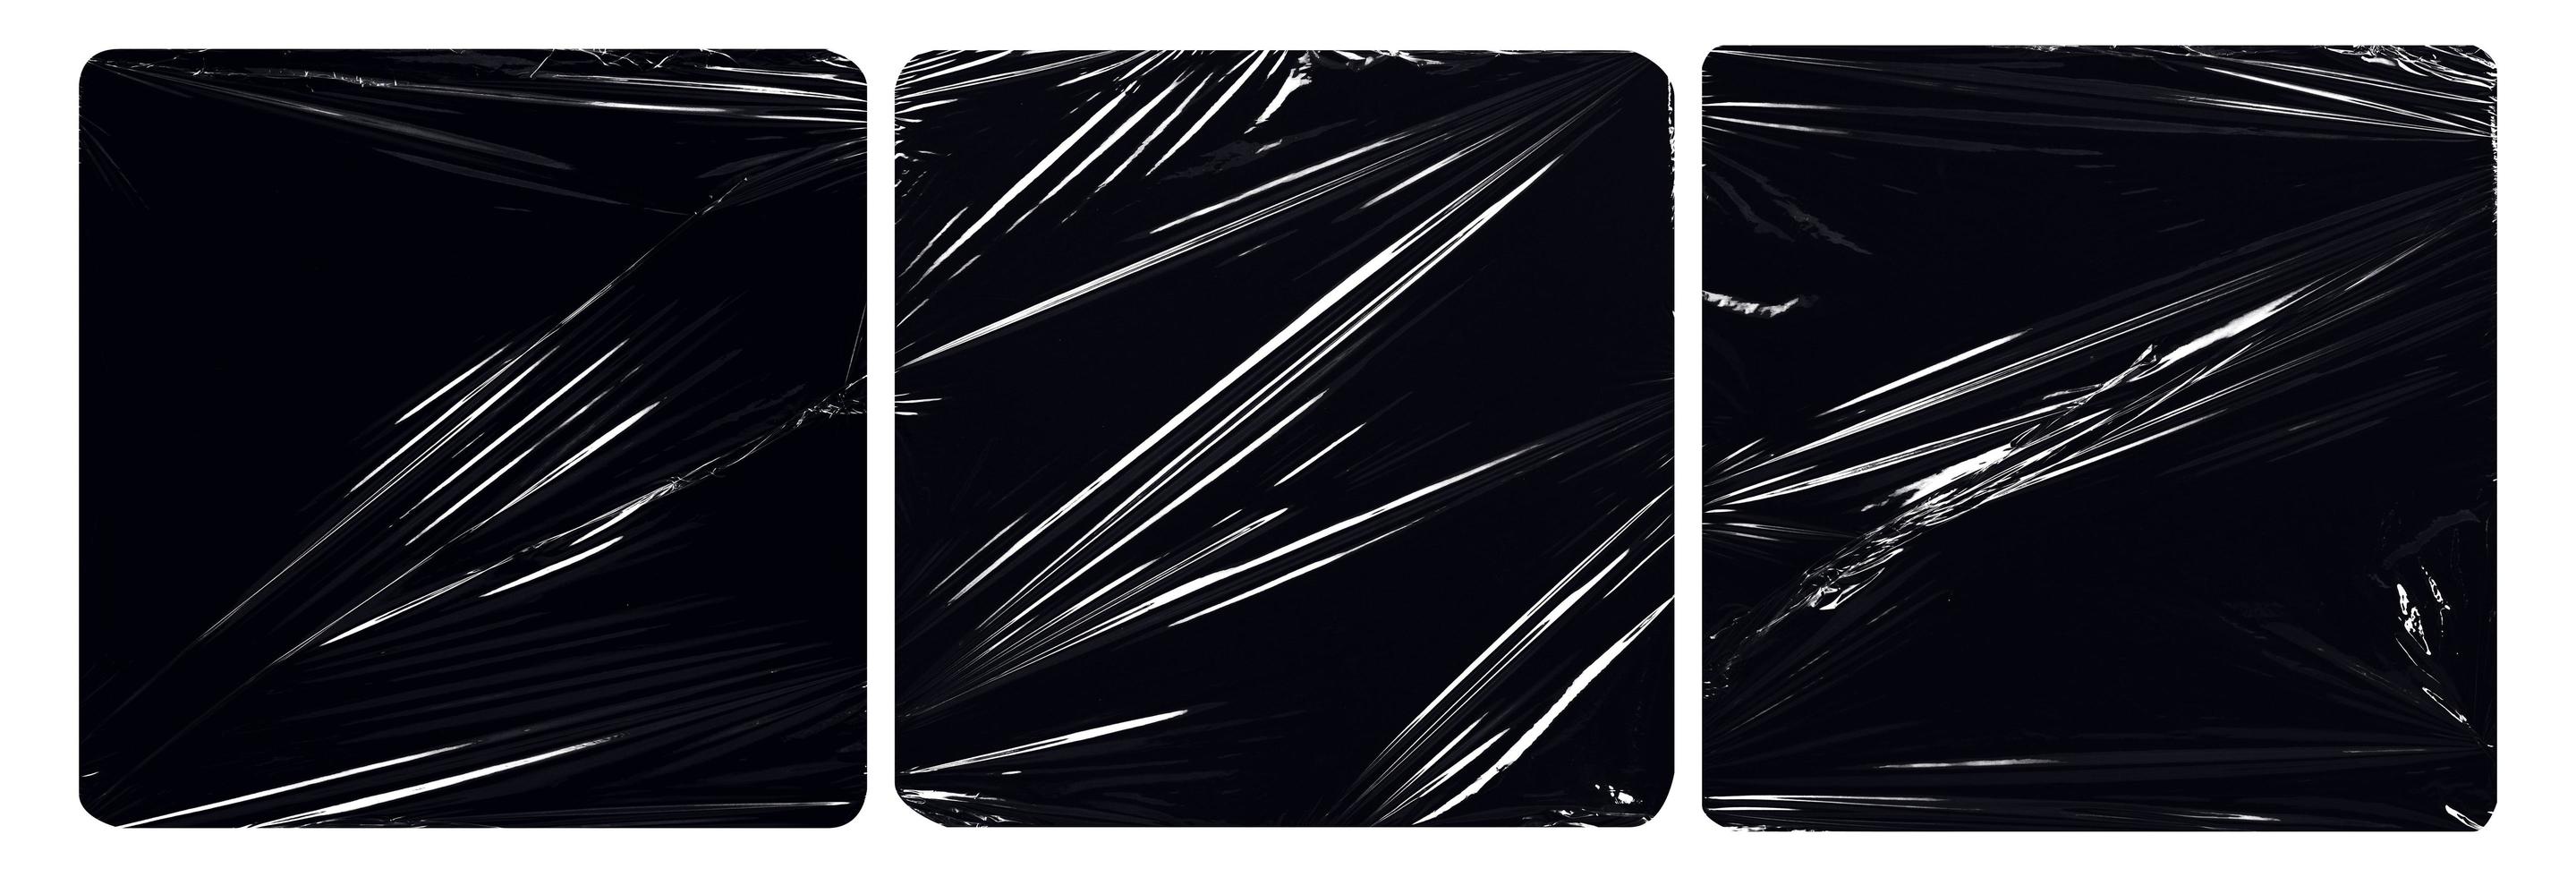 collection set of plastic wrap texture for overlay. wrinkled stretched plastic effect. transparent plastic wrap on black background. photo